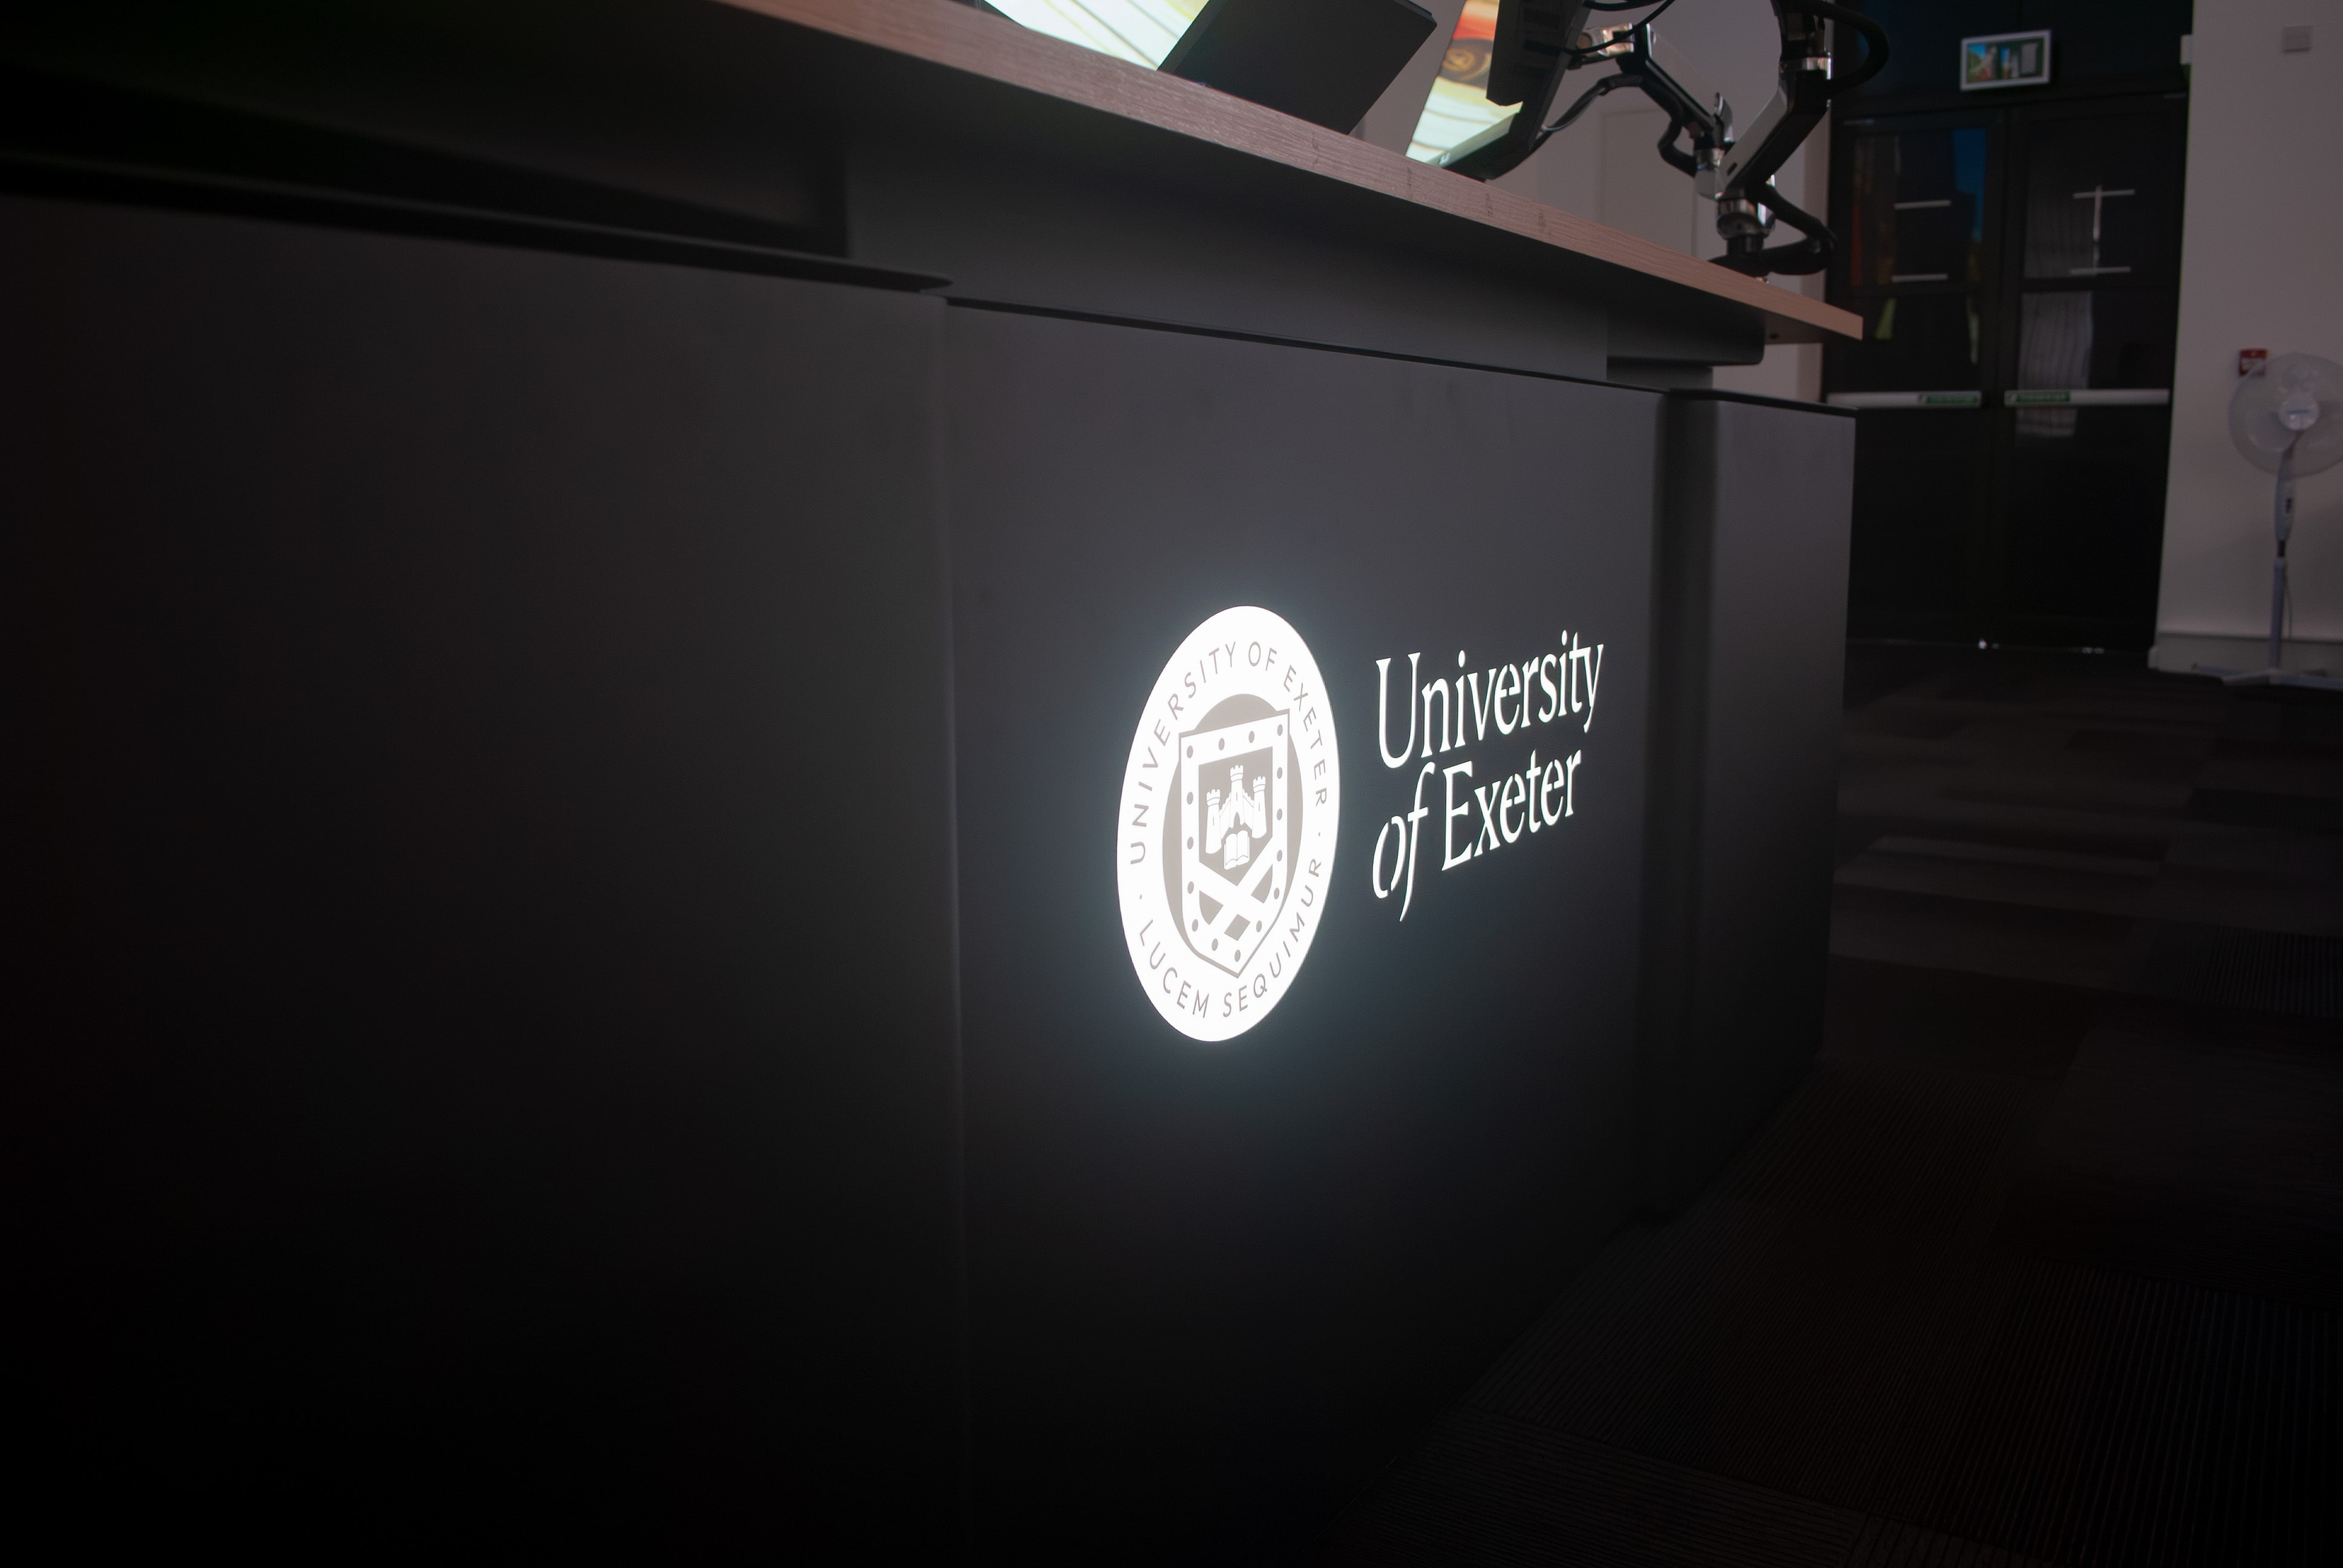 Top-Tec Lectern at University of Exeter